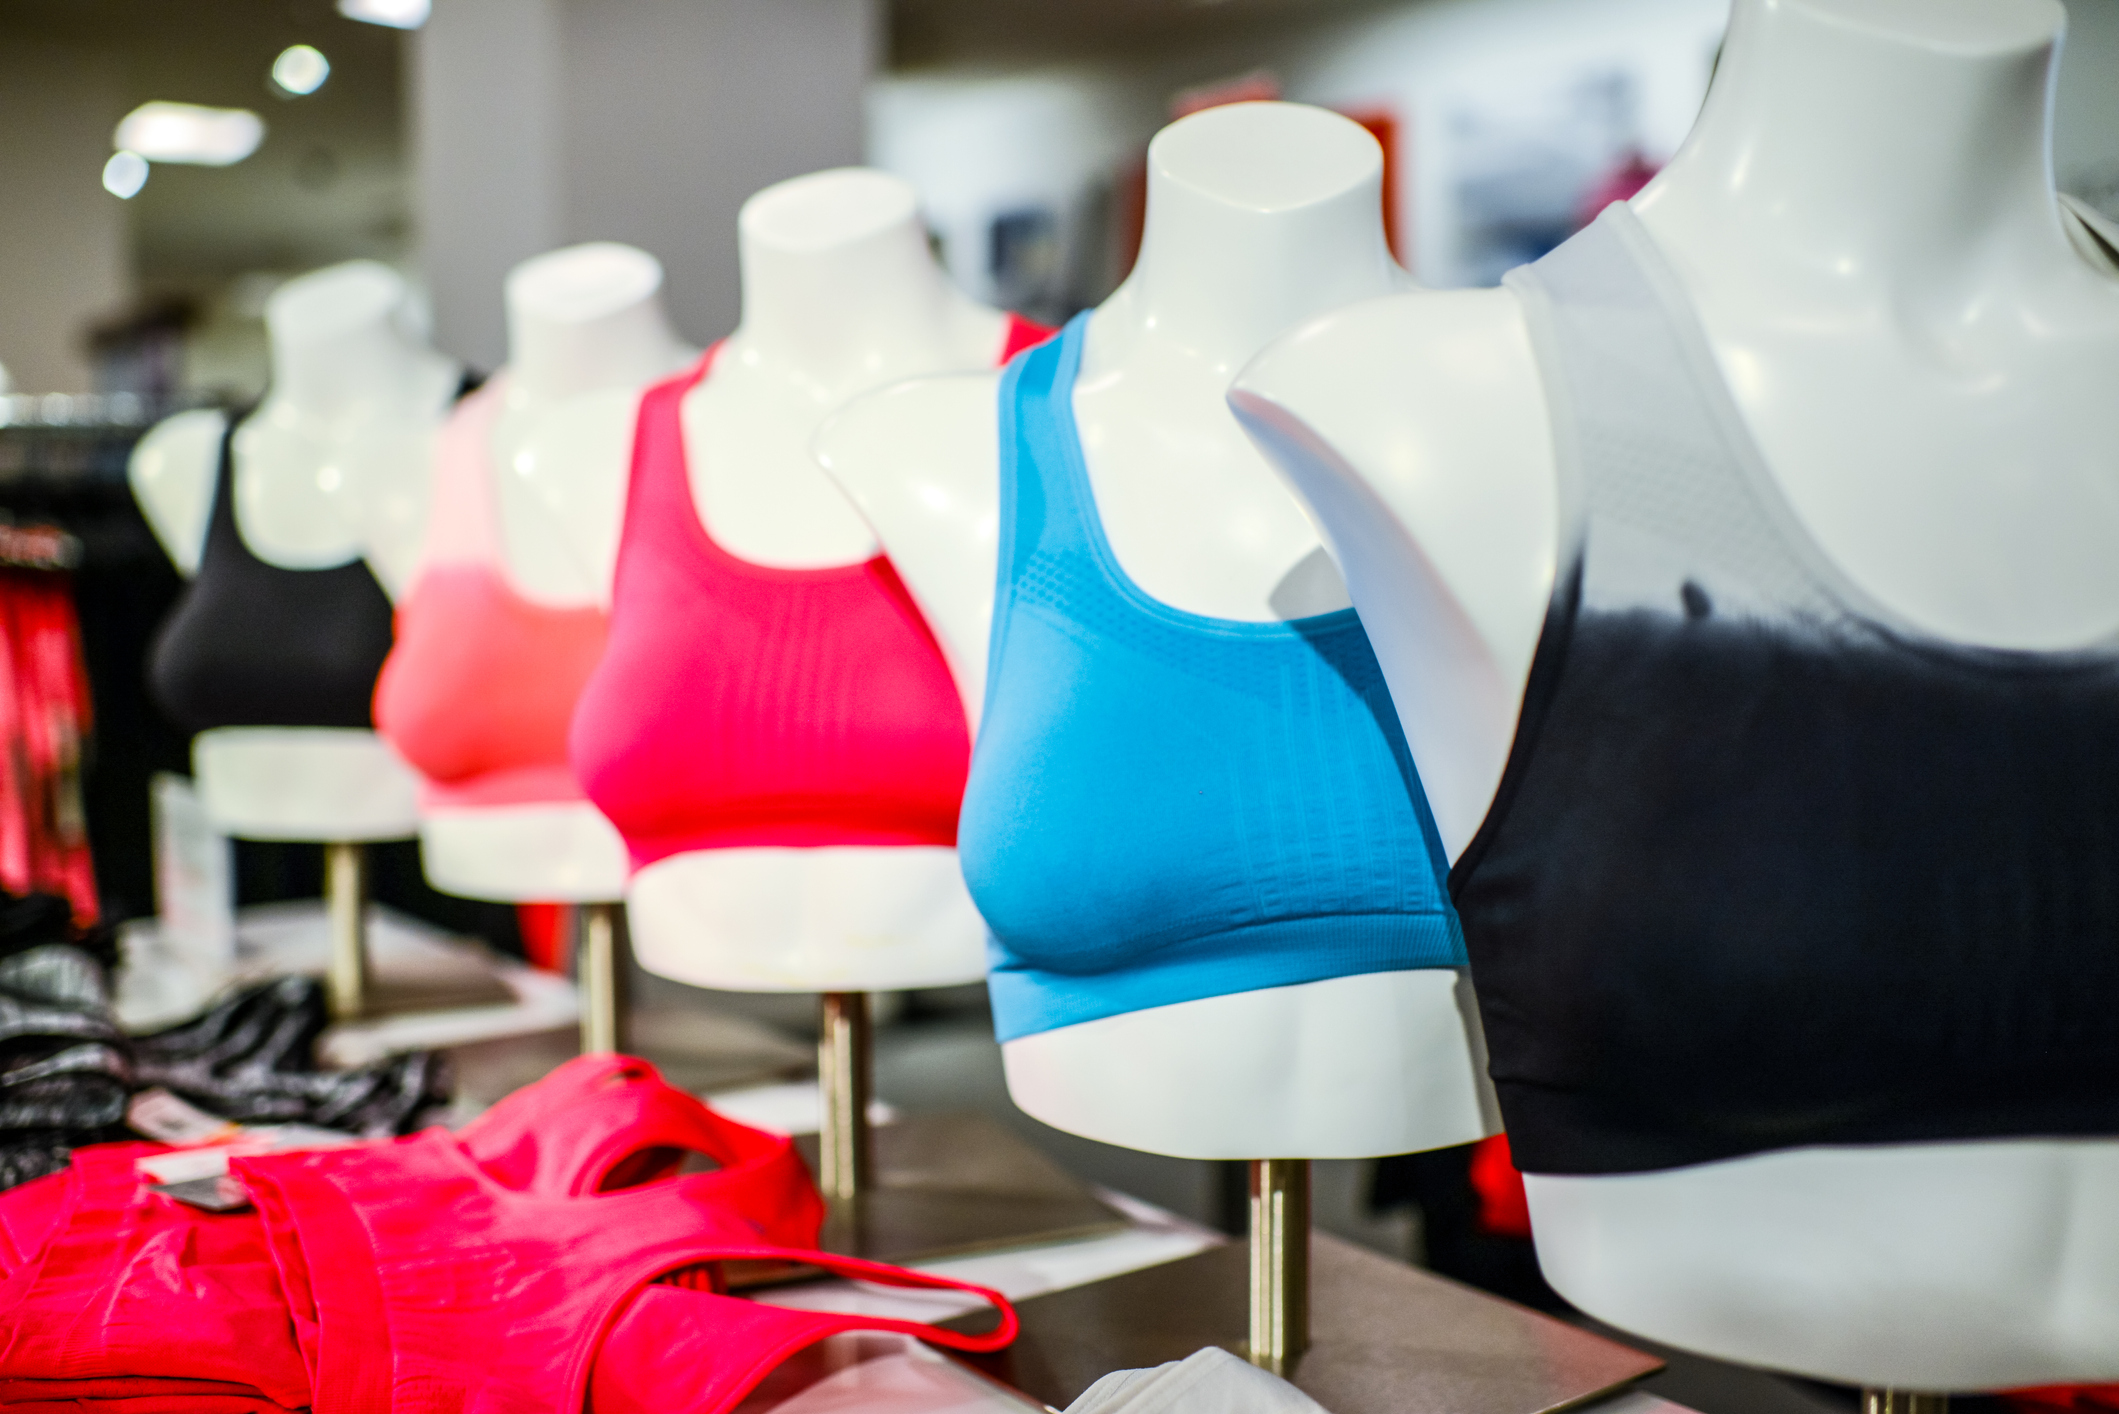 Study shows BPA toxins in sports bras, athletic shirts